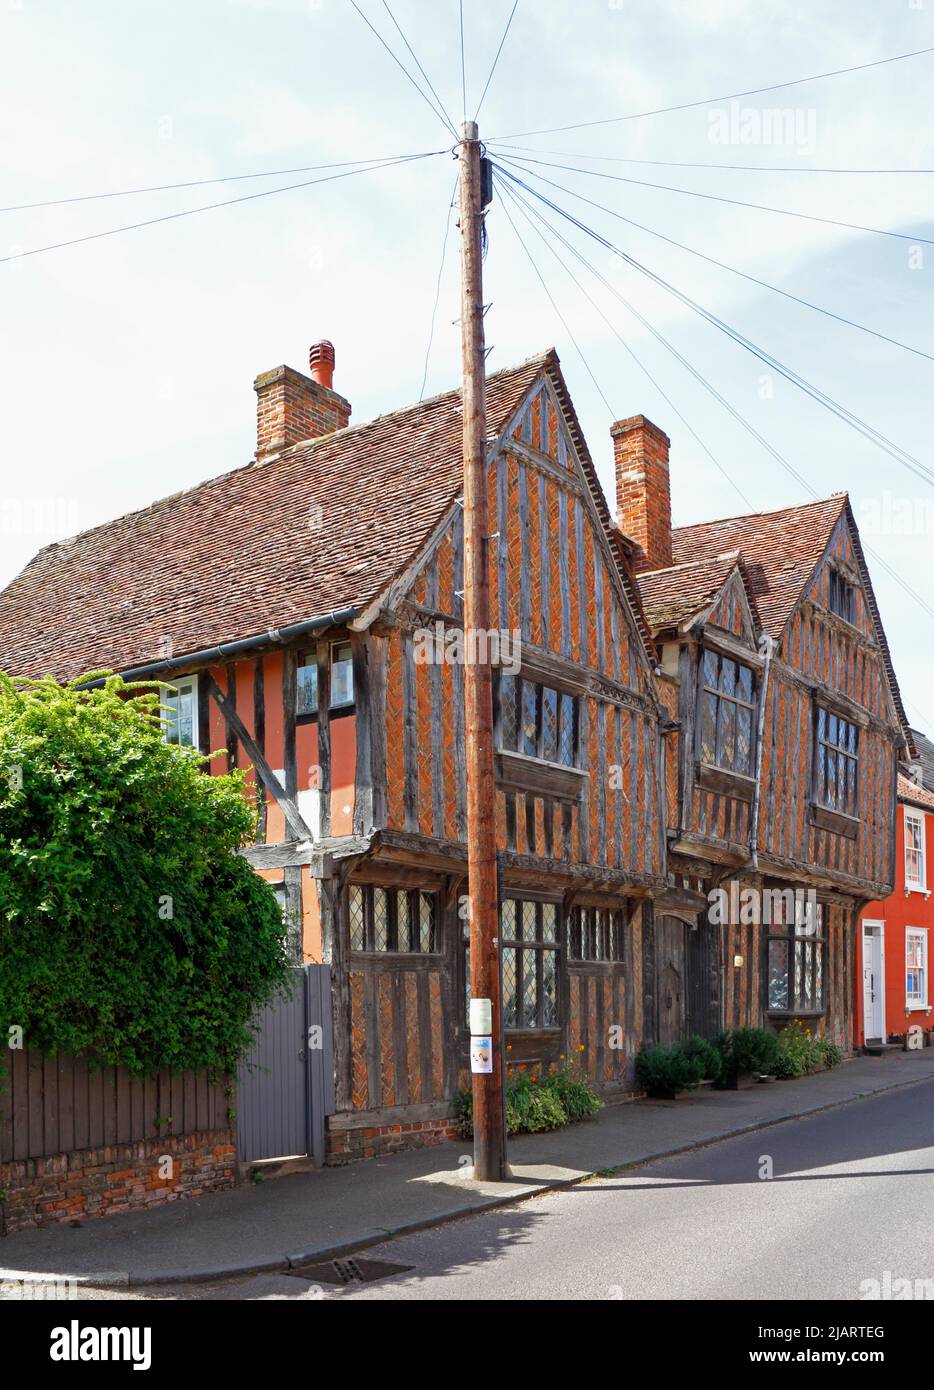 A view of the 14th century timber-framed De Vere House in the well preserved medieval village of Lavenham, Suffolk, England, United Kingdom. Stock Photo